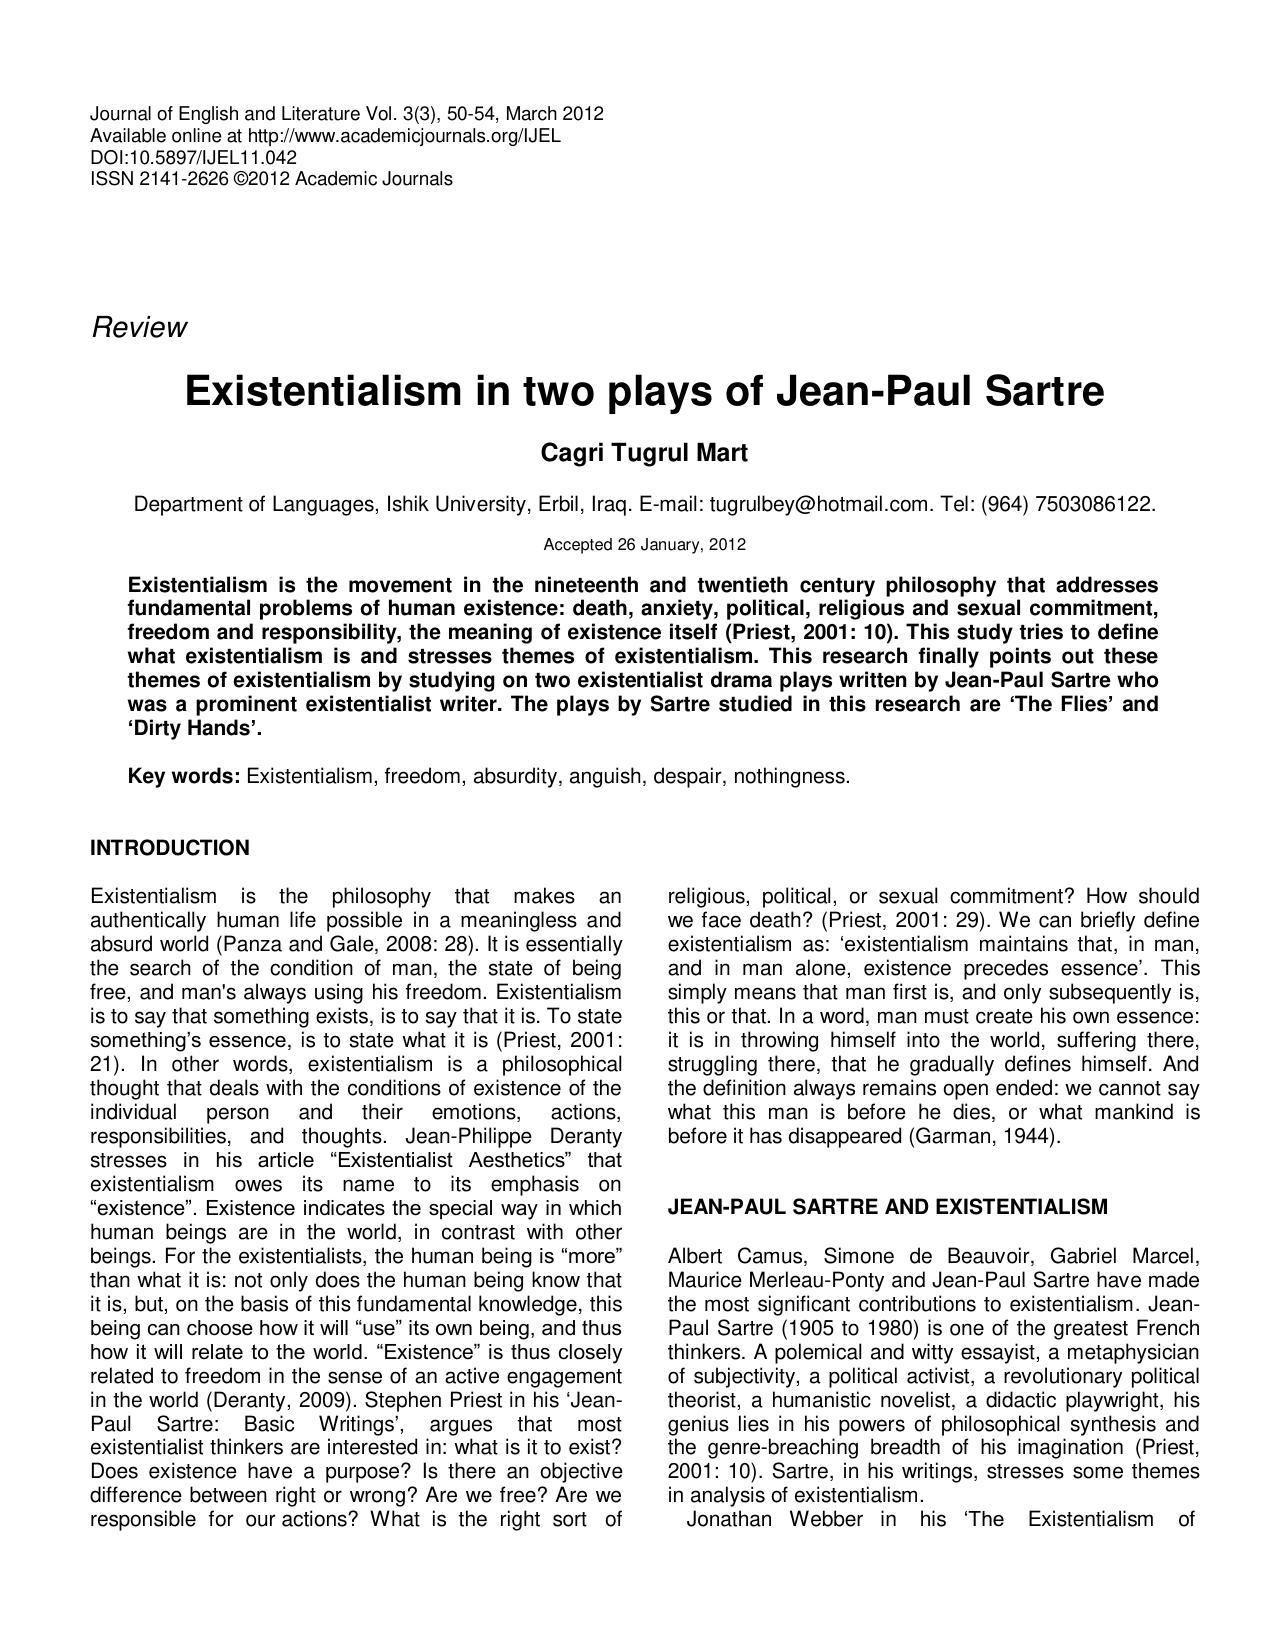 Existentialism in two plays of Jean-Paul Sartre 2012